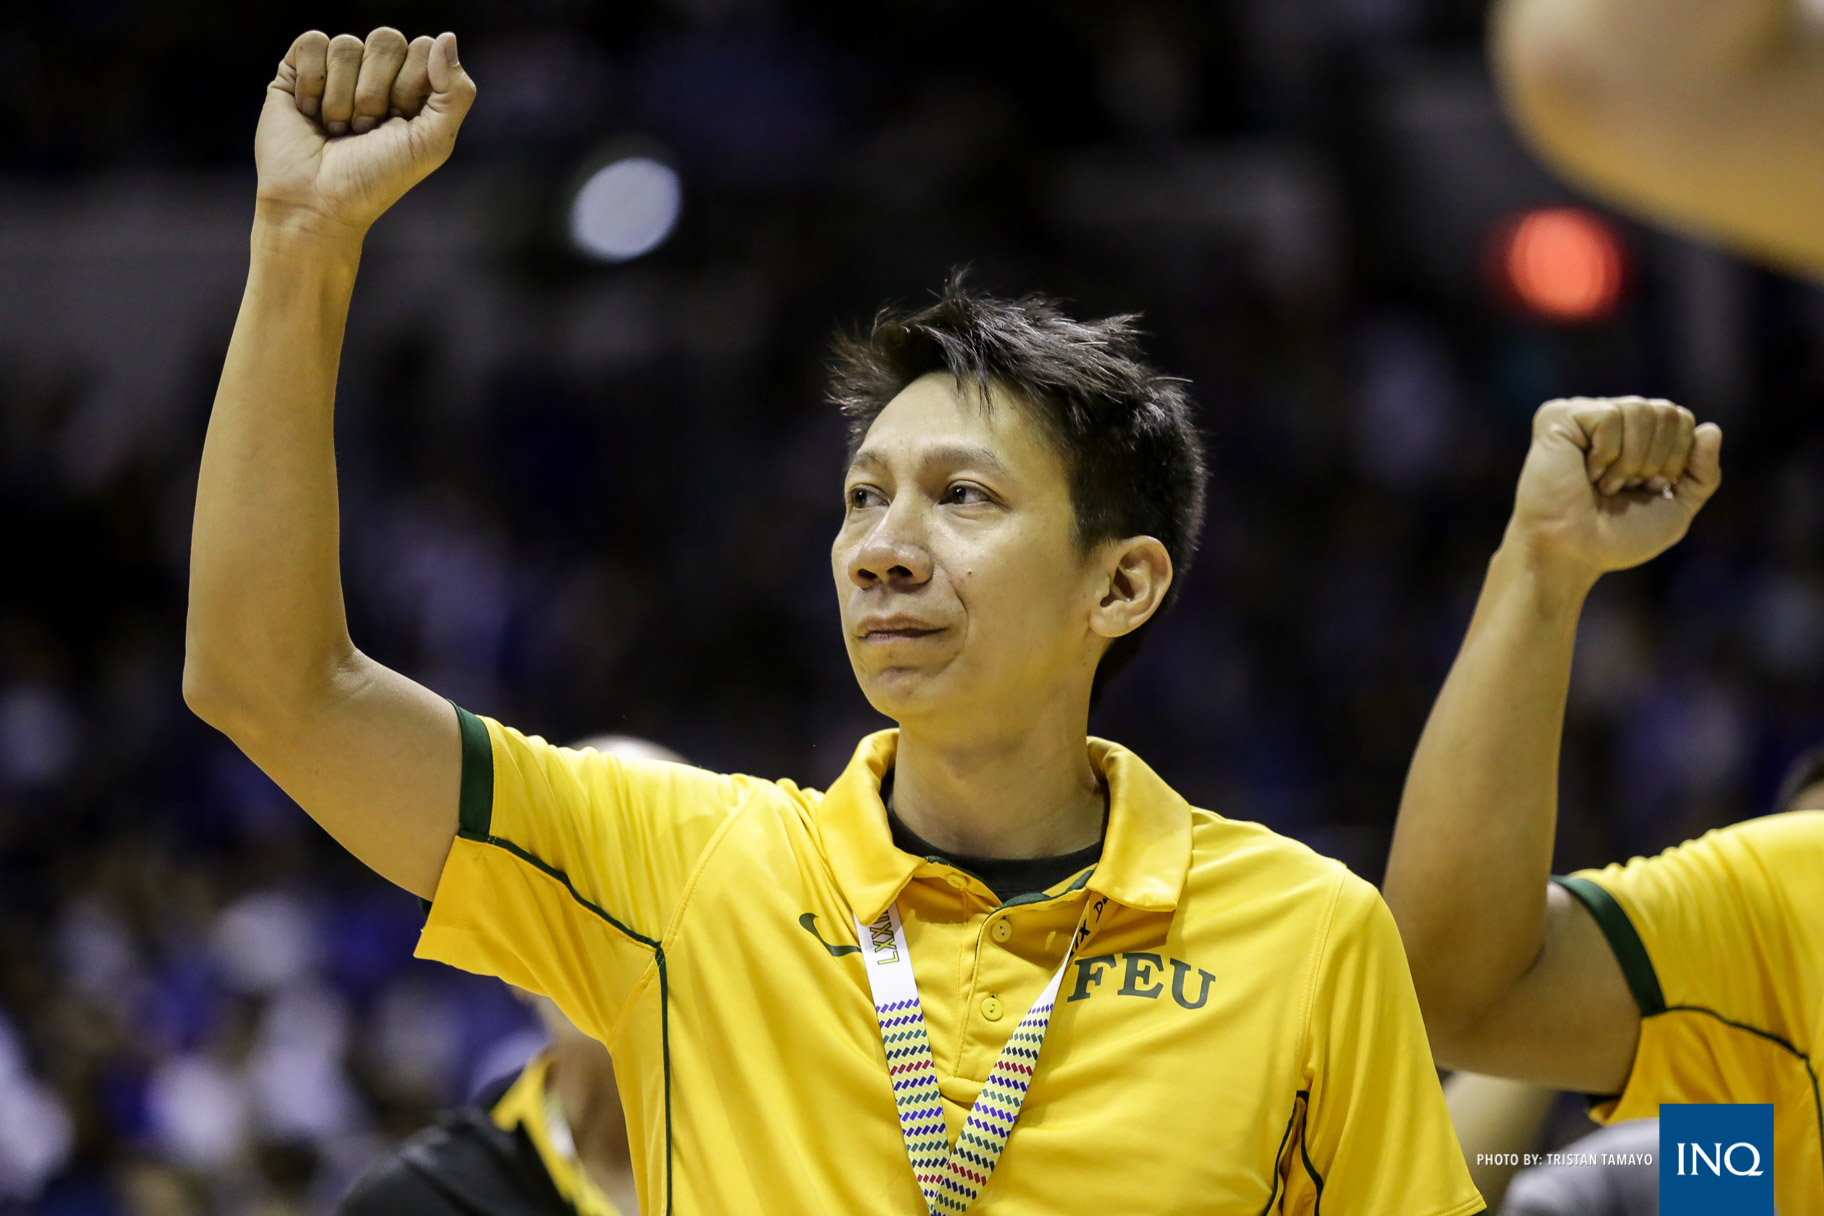 HEAD HIGH. FEU head coach Nash Racela says he's proud of the Tamaraws for their effort in a 69-68 overtime loss to the Ateneo Blue Eagles in the UAAP Season 79 Final Four Wednesday, Nov. 30, 2016, at Smart Araneta Coliseum. Tristan Tamayo/INQUIRER.net